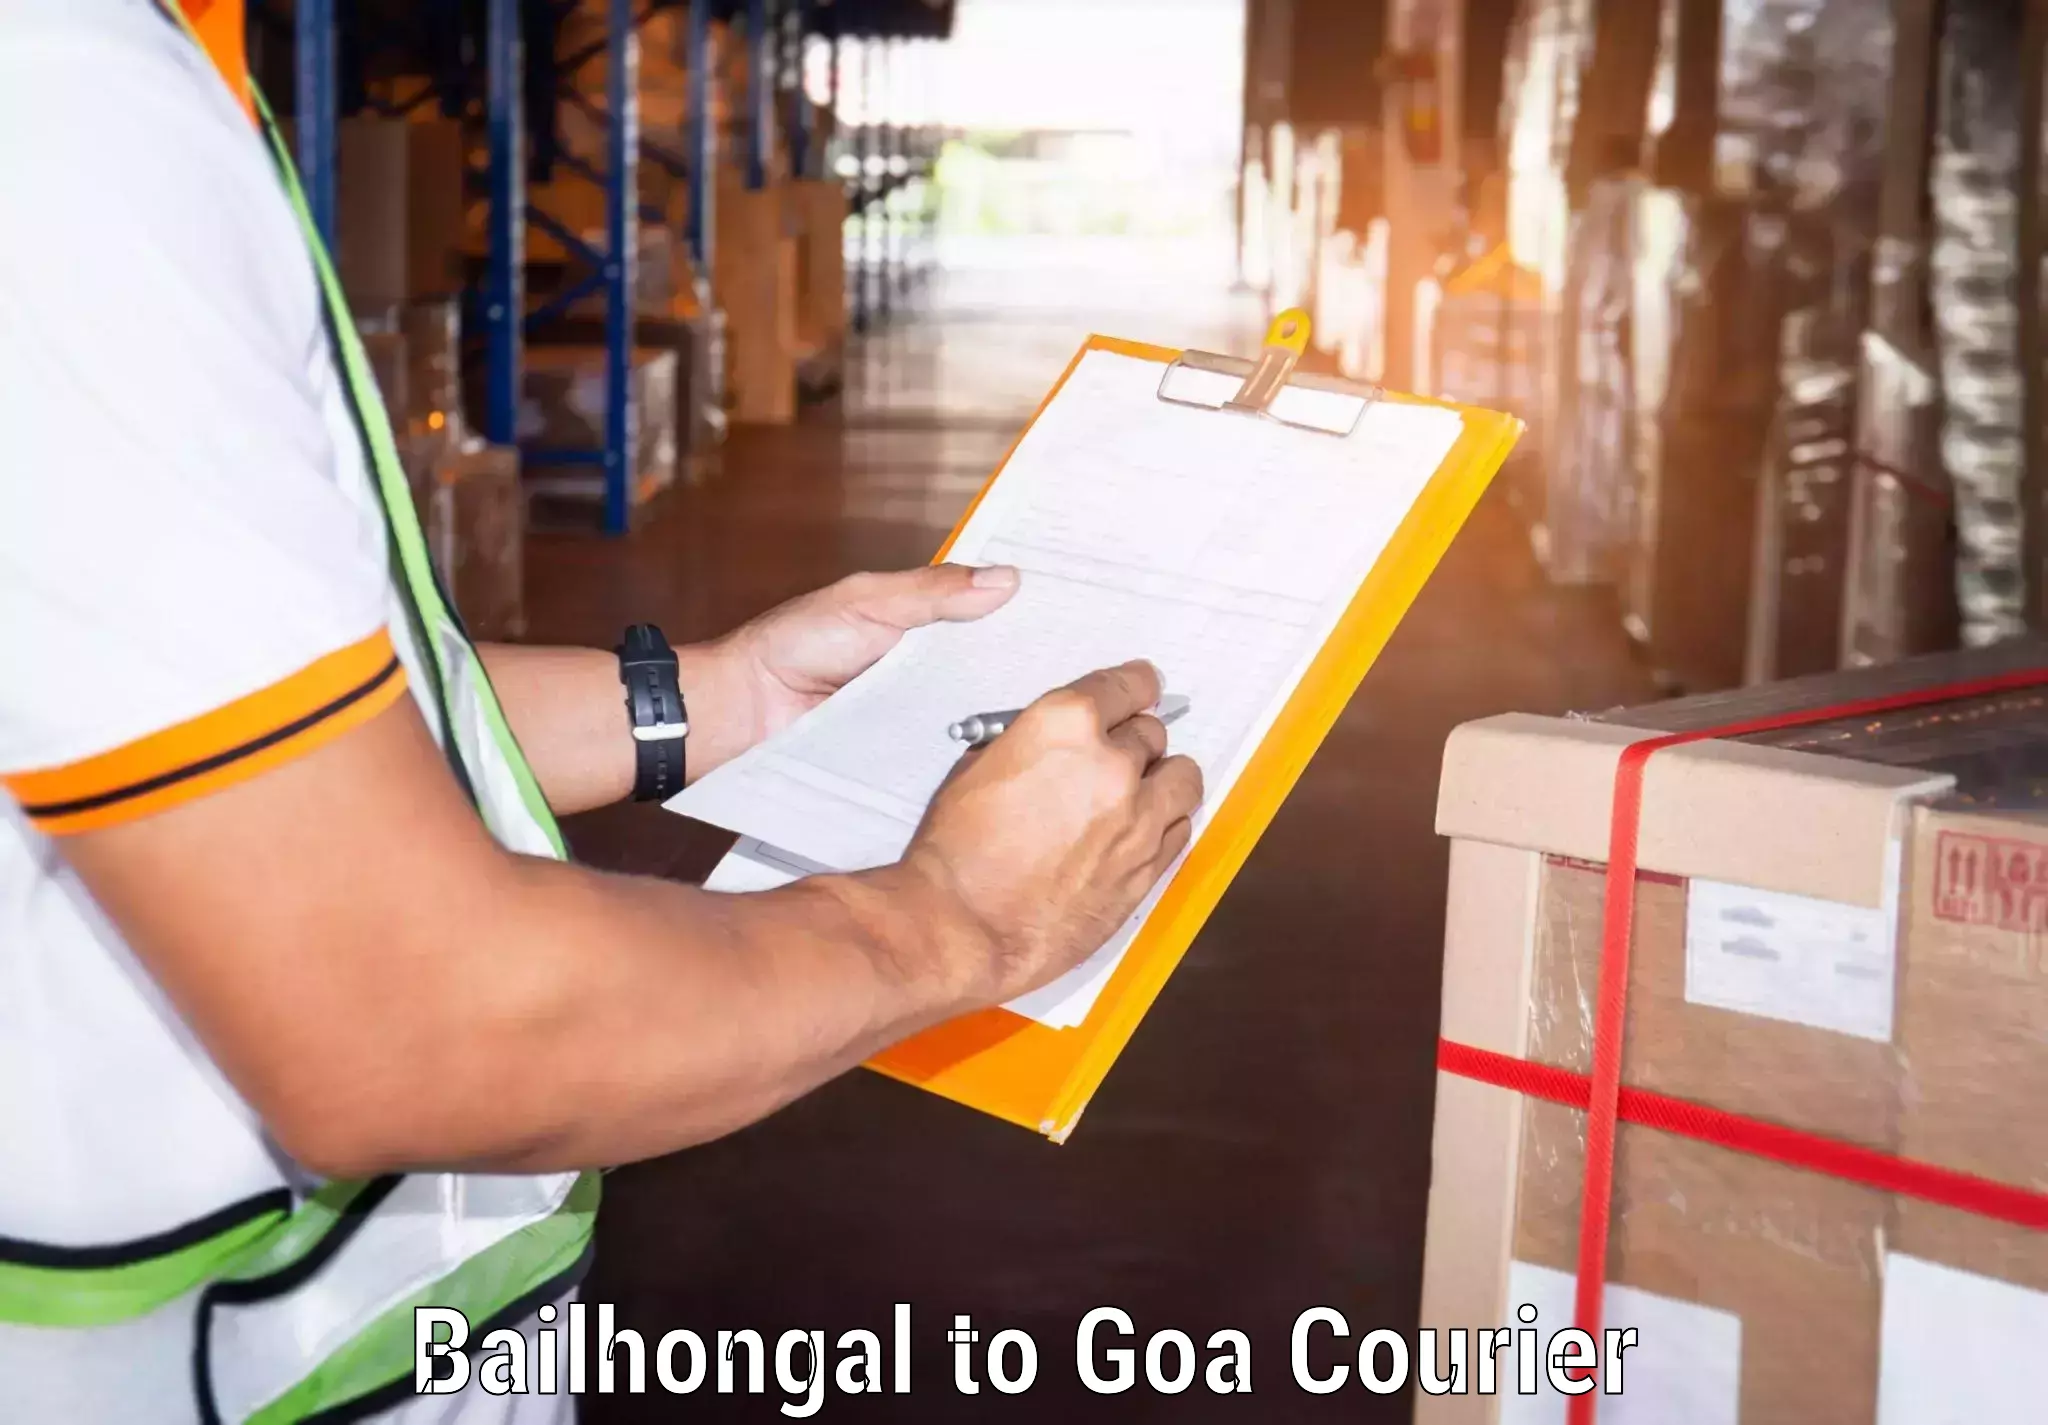 Reliable delivery network Bailhongal to Goa